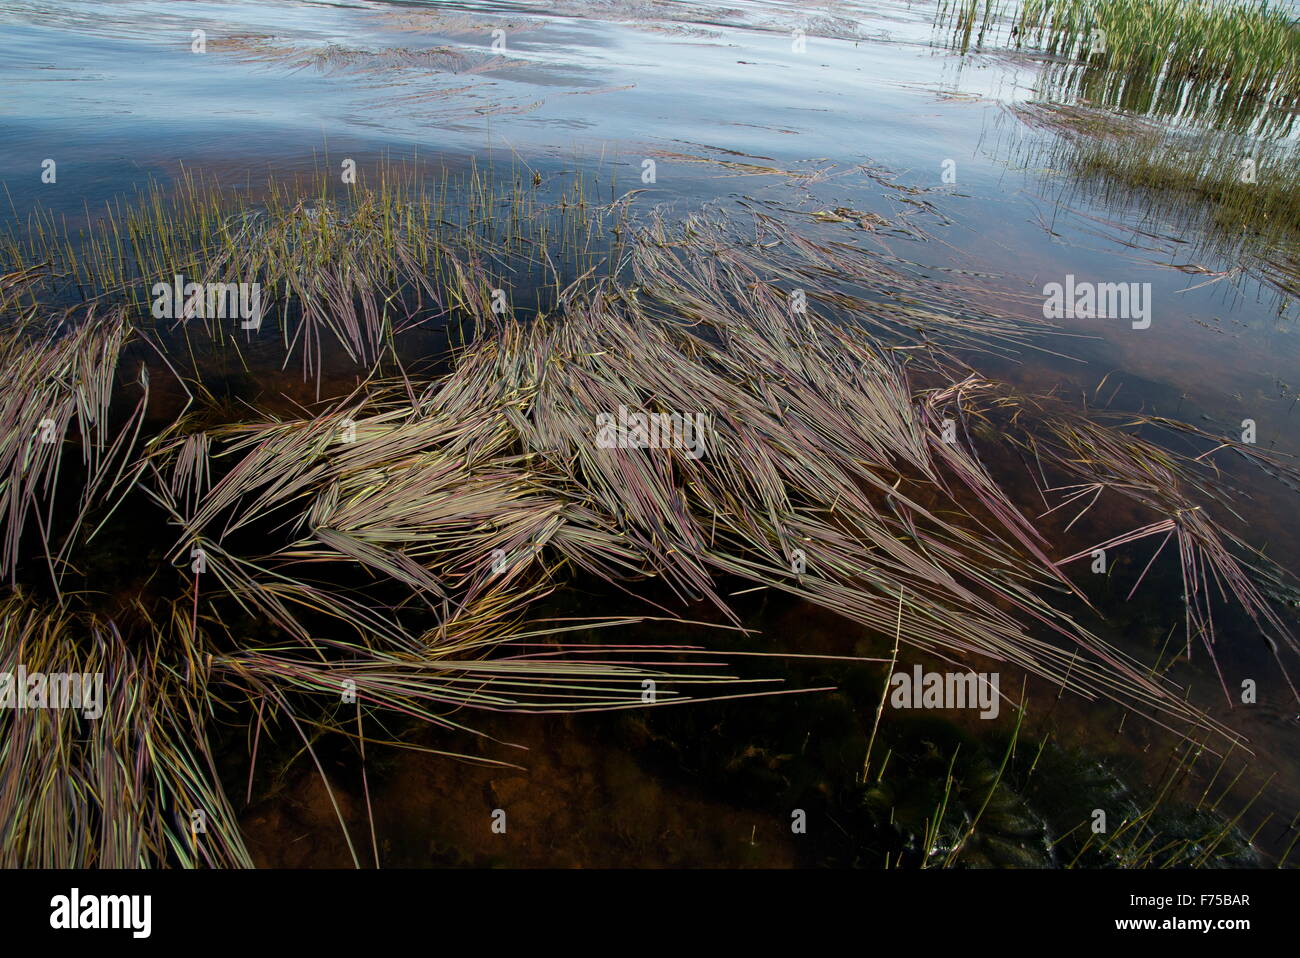 A sweet-grass, probably Glyceria fluitans, on the surface of Deer Lake, west Newfoundland. Stock Photo